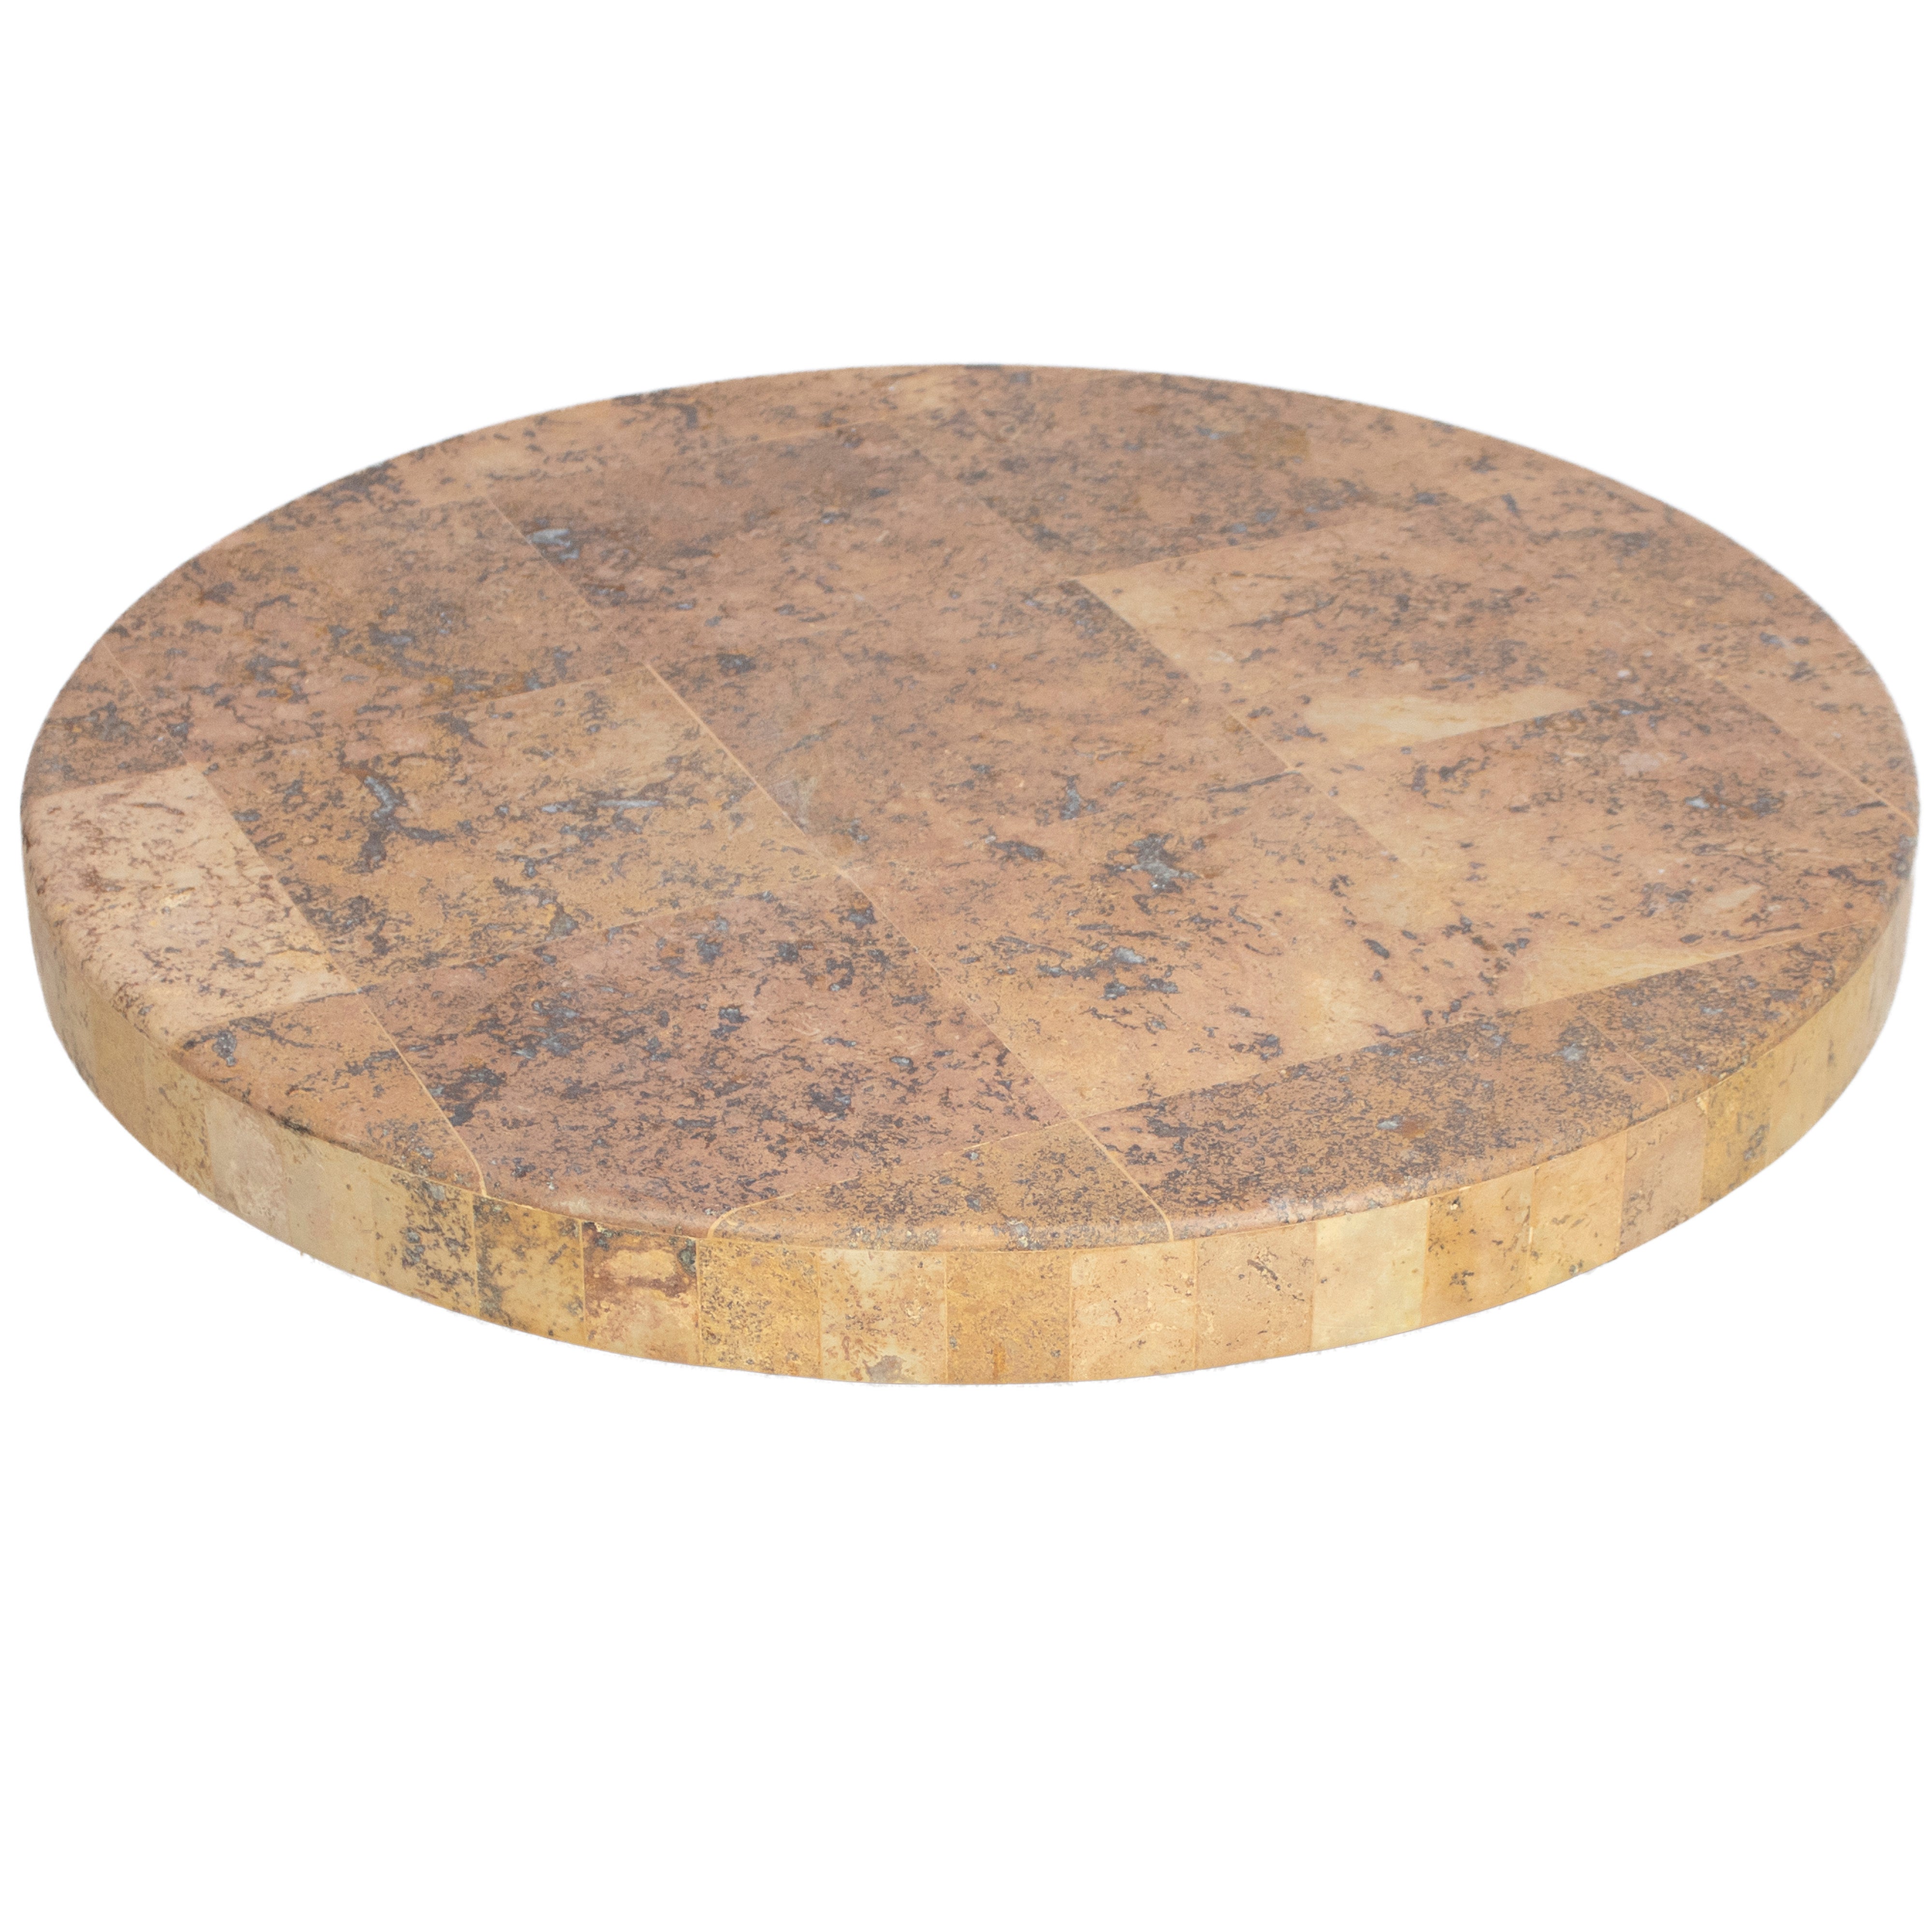 Stone Top Round Side Table 22"Hx24"W - Preowned